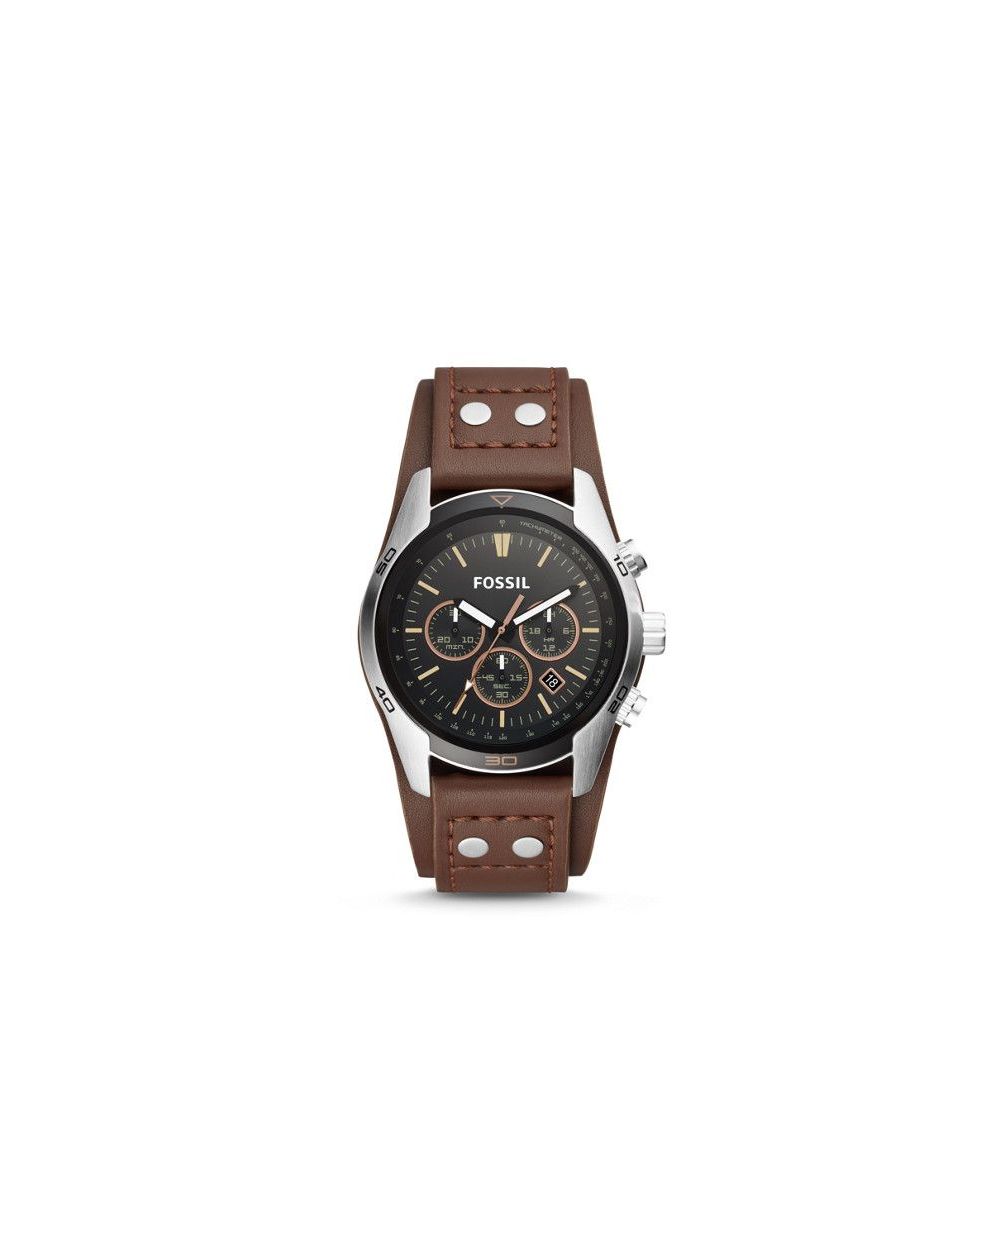 Fossil - Coachman Watch Chronograph Leather - Brown